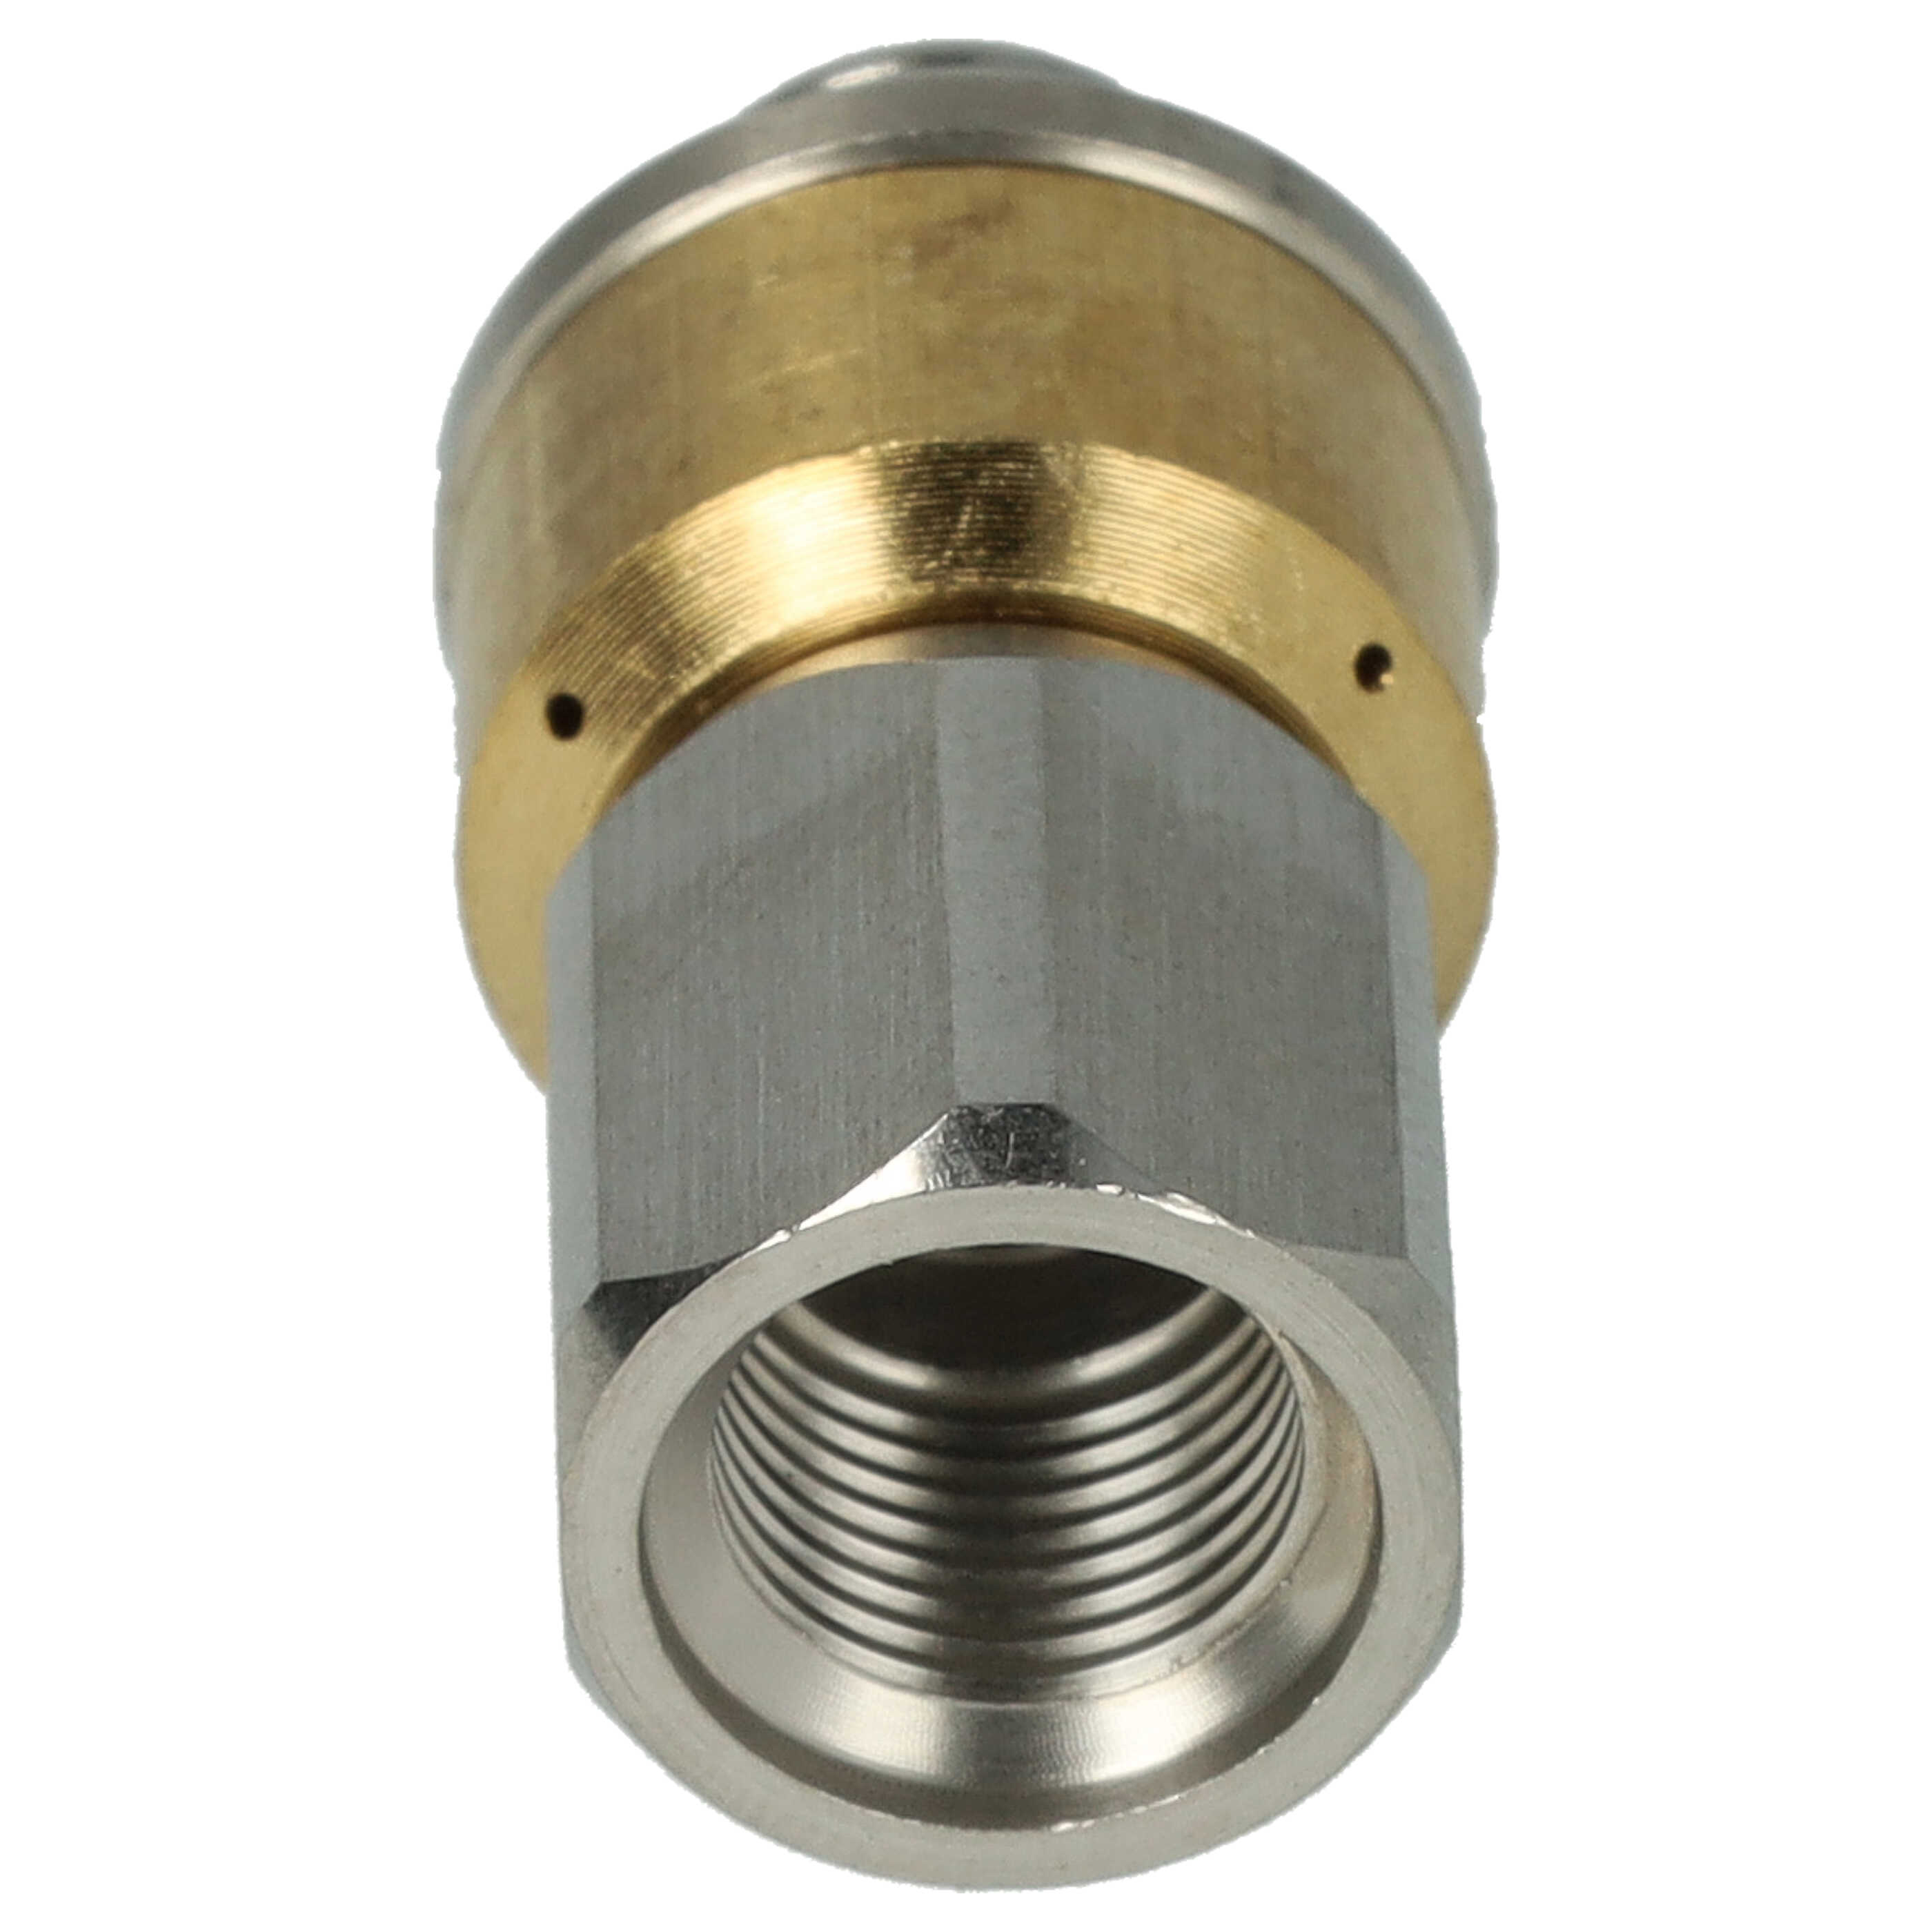 Pipe Cleaning Nozzle as Replacement for Kränzle KNR055 - Stainless Steel, Rotating